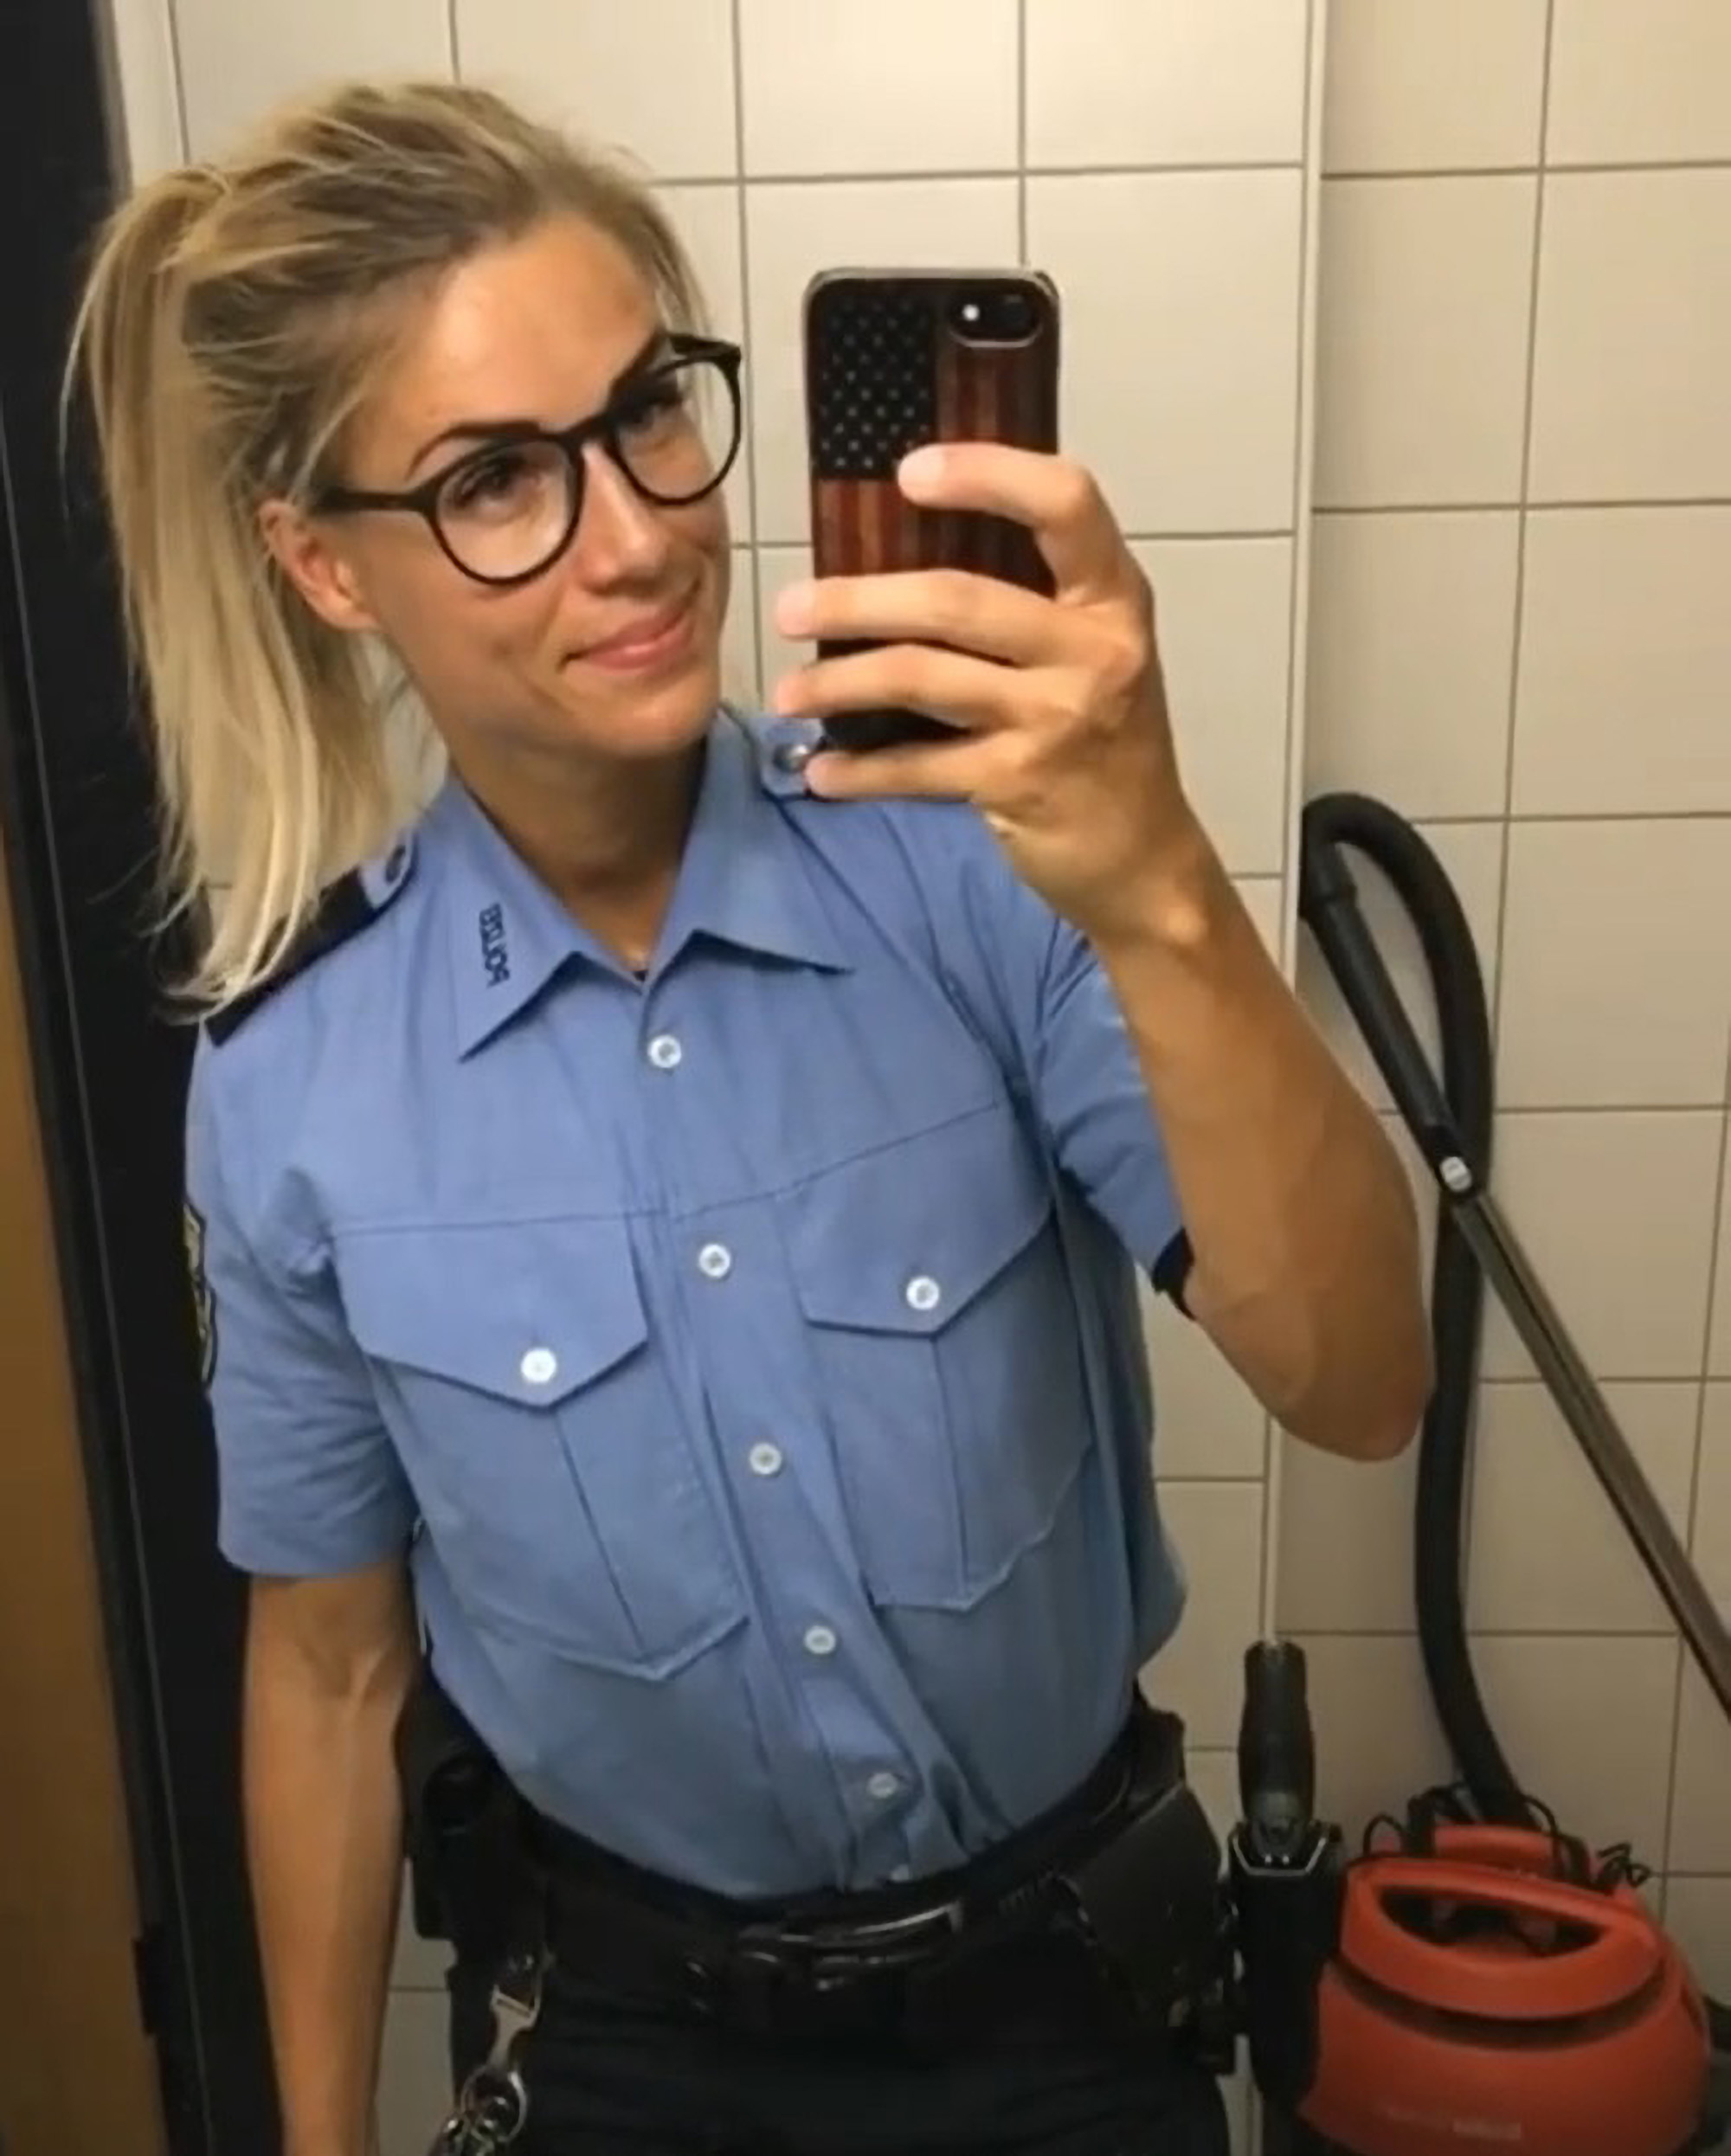 Read more about the article Germany’s Hottest Cop Who Left To Become Influencer Gets New Role As TV Detective